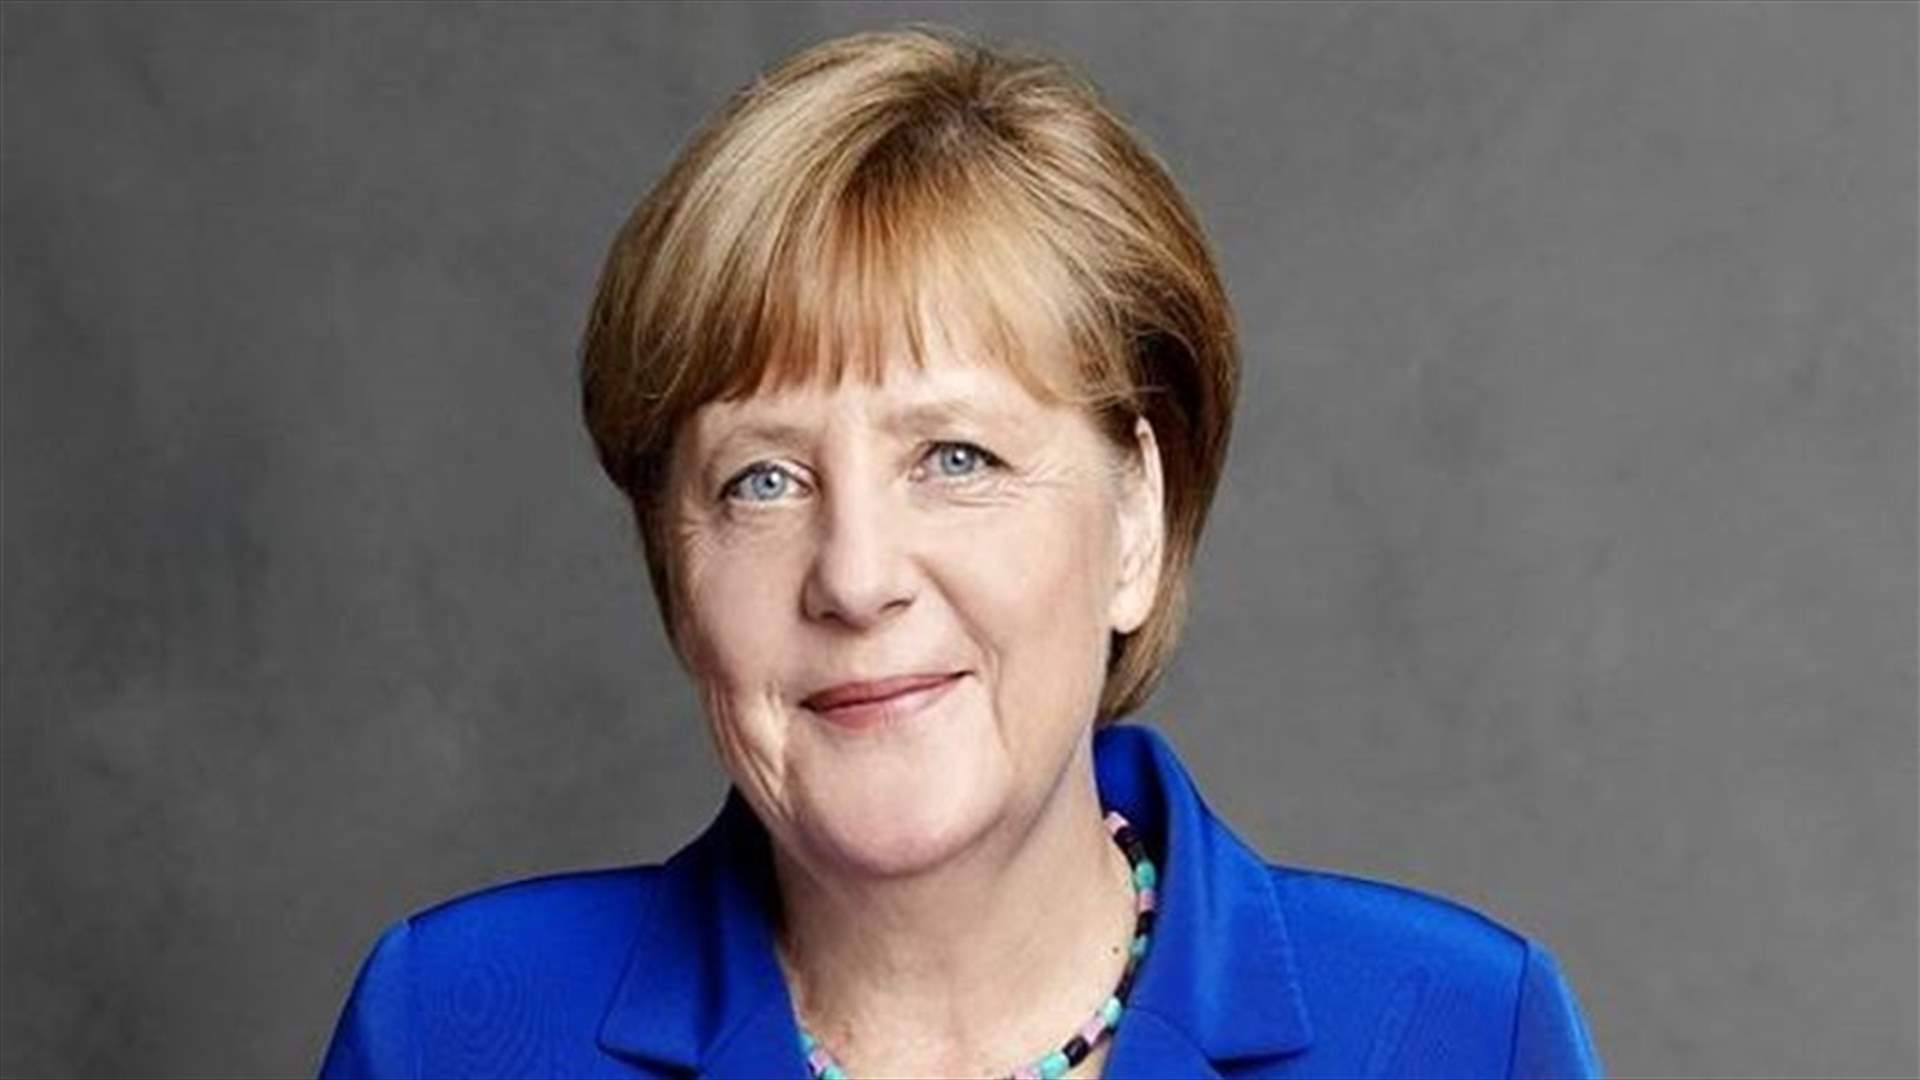 Merkel strongly condemns Turkish military offensive in Afrin